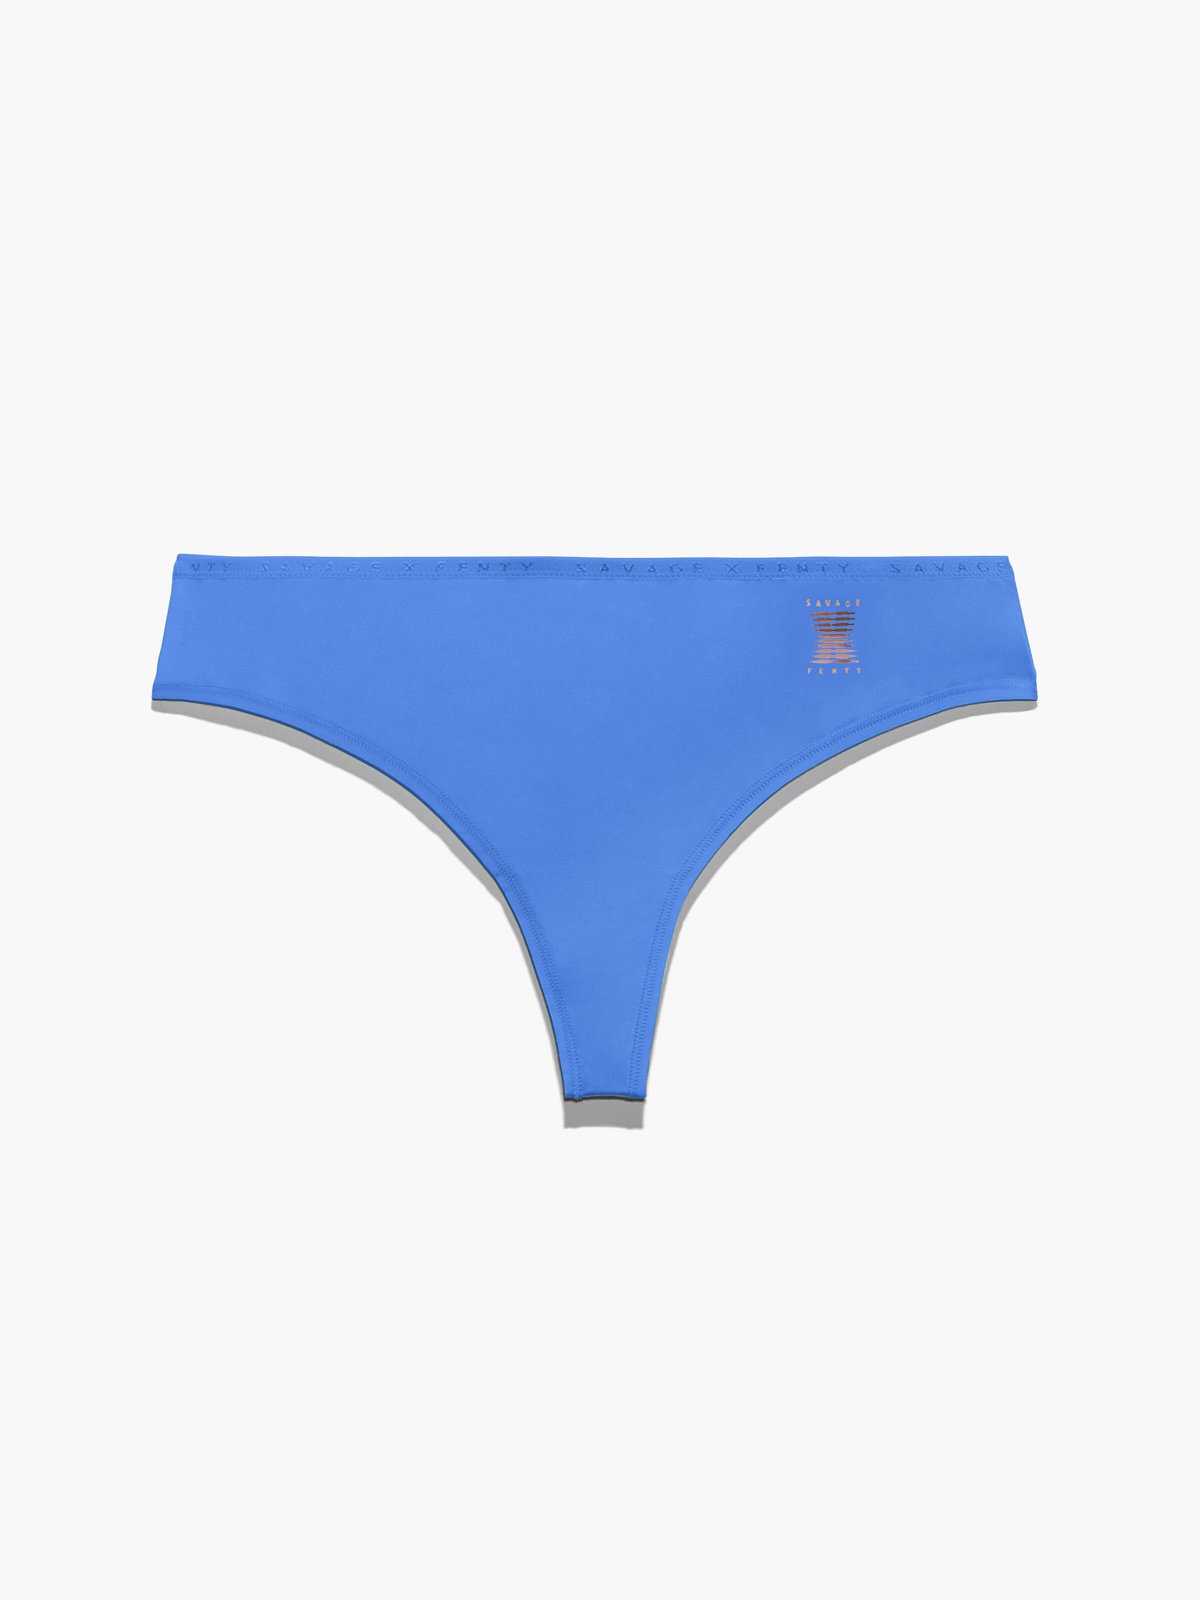 Barely There CustomFlex Fit Microfiber Thong & Reviews